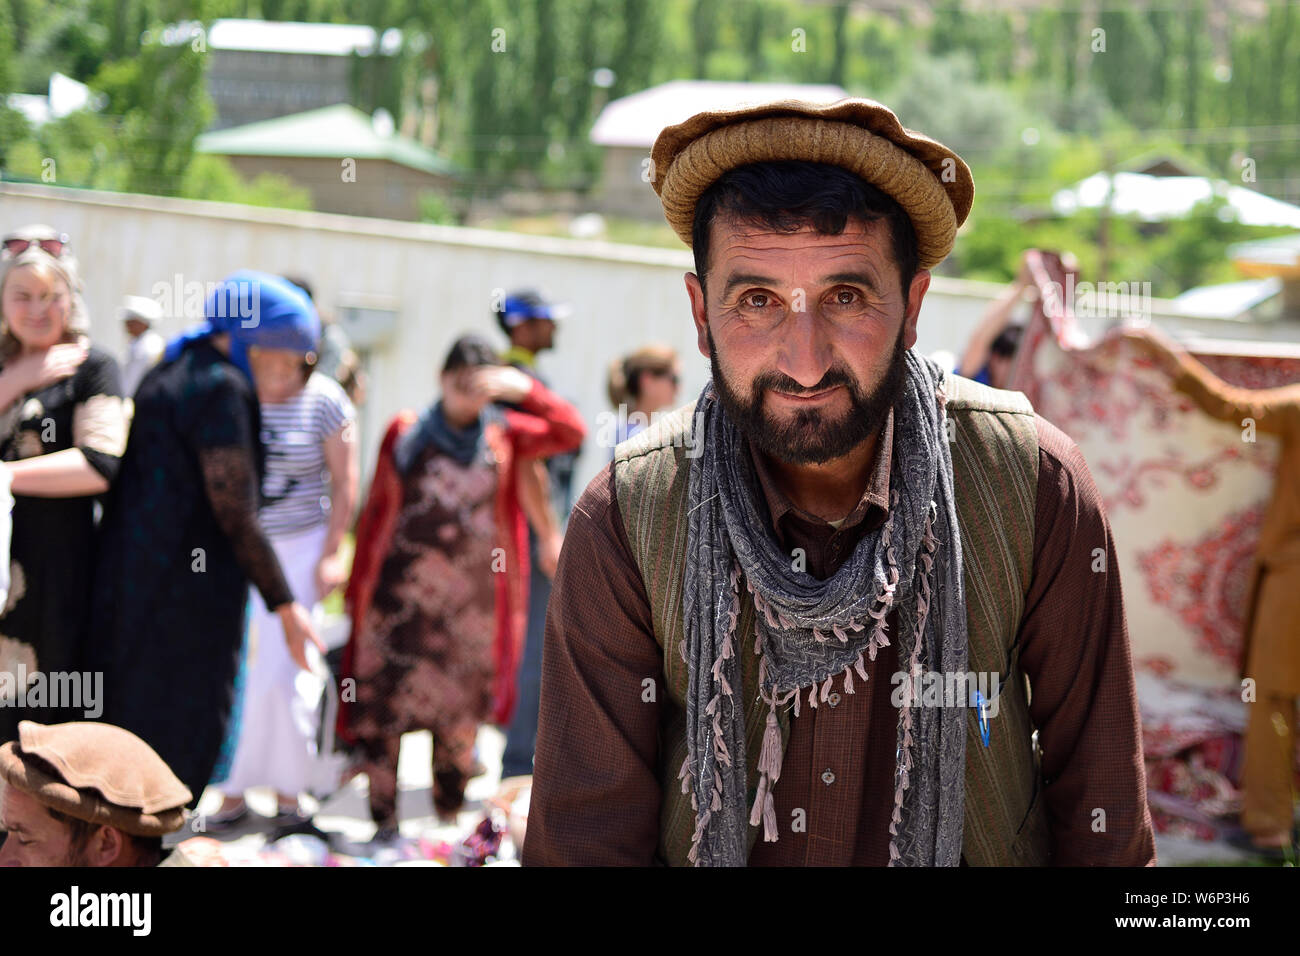 KHOROG, PAMIR MOUNTAINS, TAJIKISTAN - 06 JULY 2019: Portrait of the people of Afghanistan which is trading on the market in Tajikistan in the Pamir Mo Stock Photo